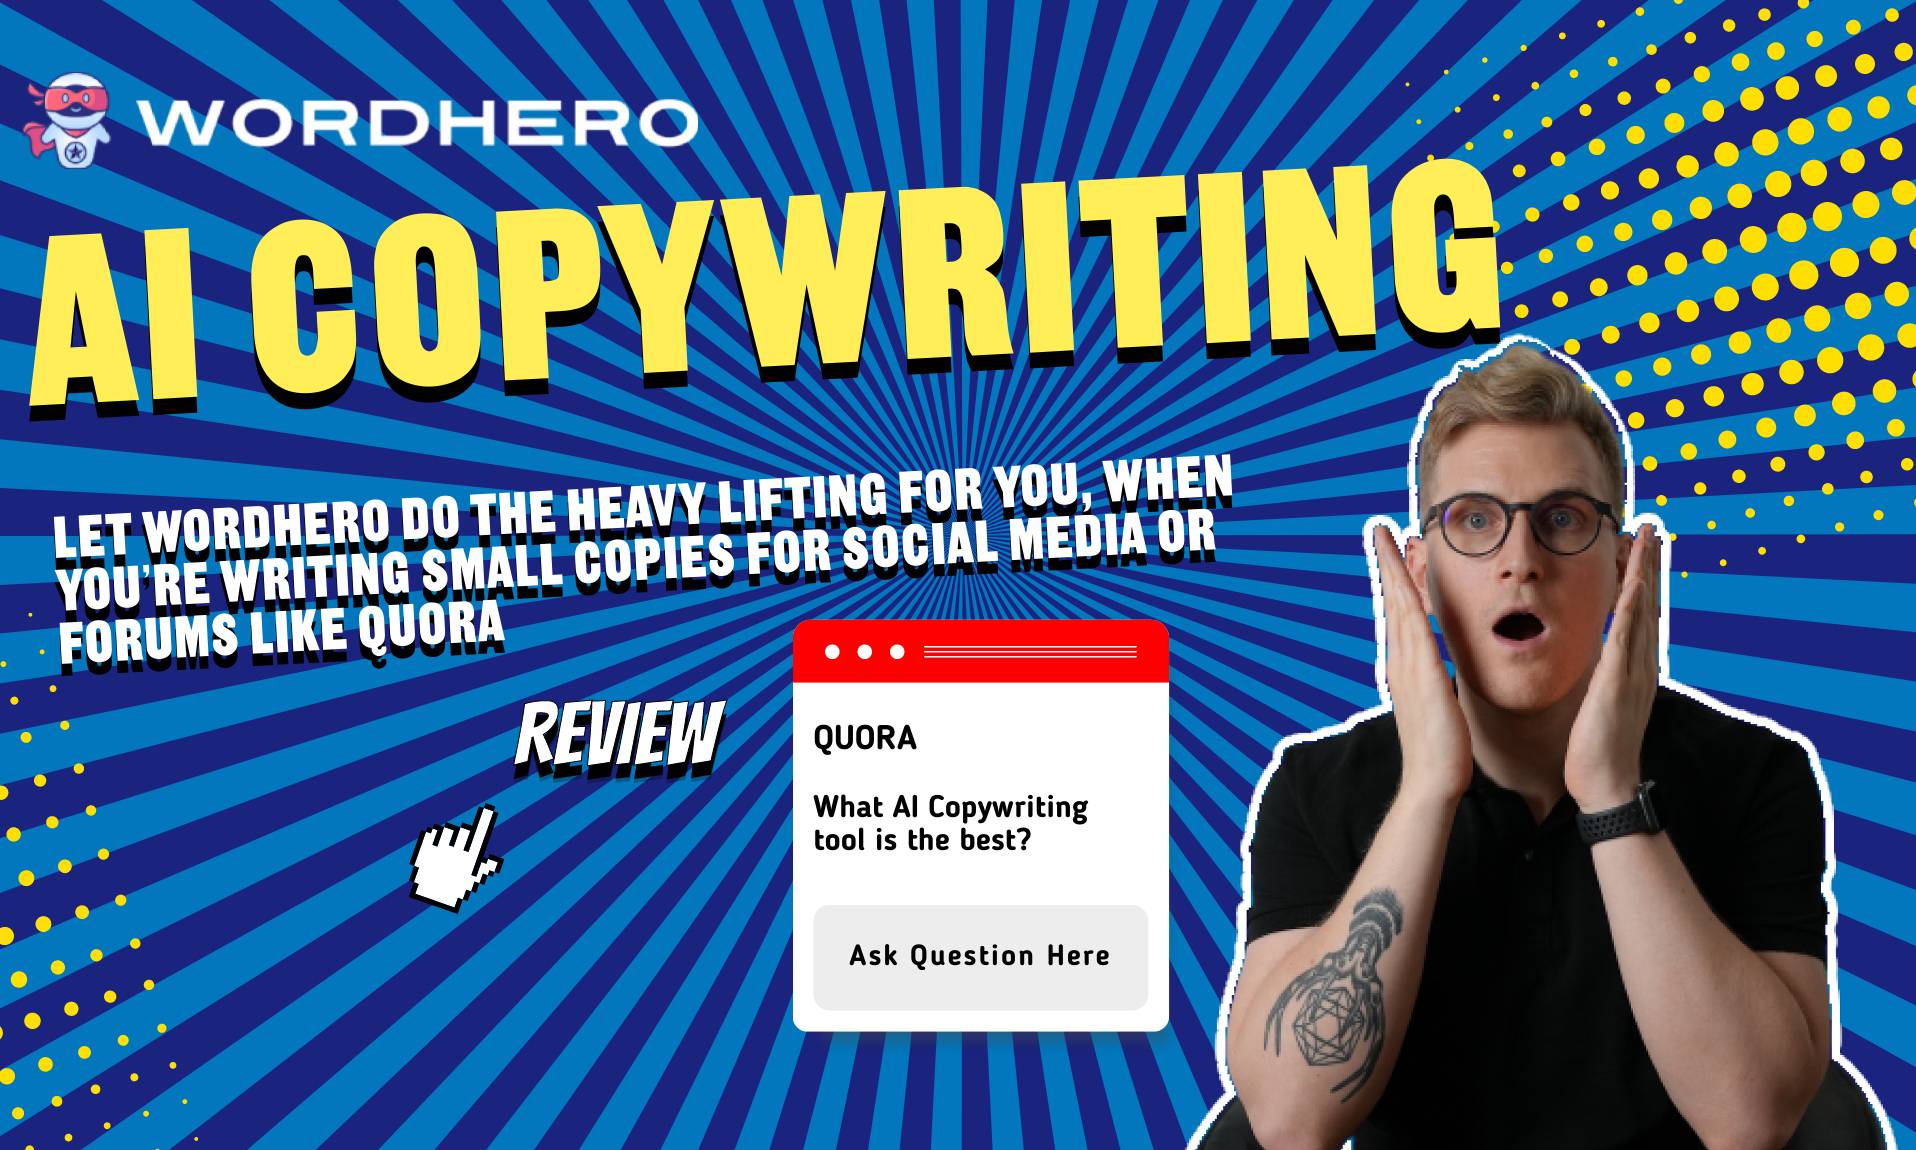 WordHero Review - AI Copywriting software for generating blog post ideas, blog intros and much more